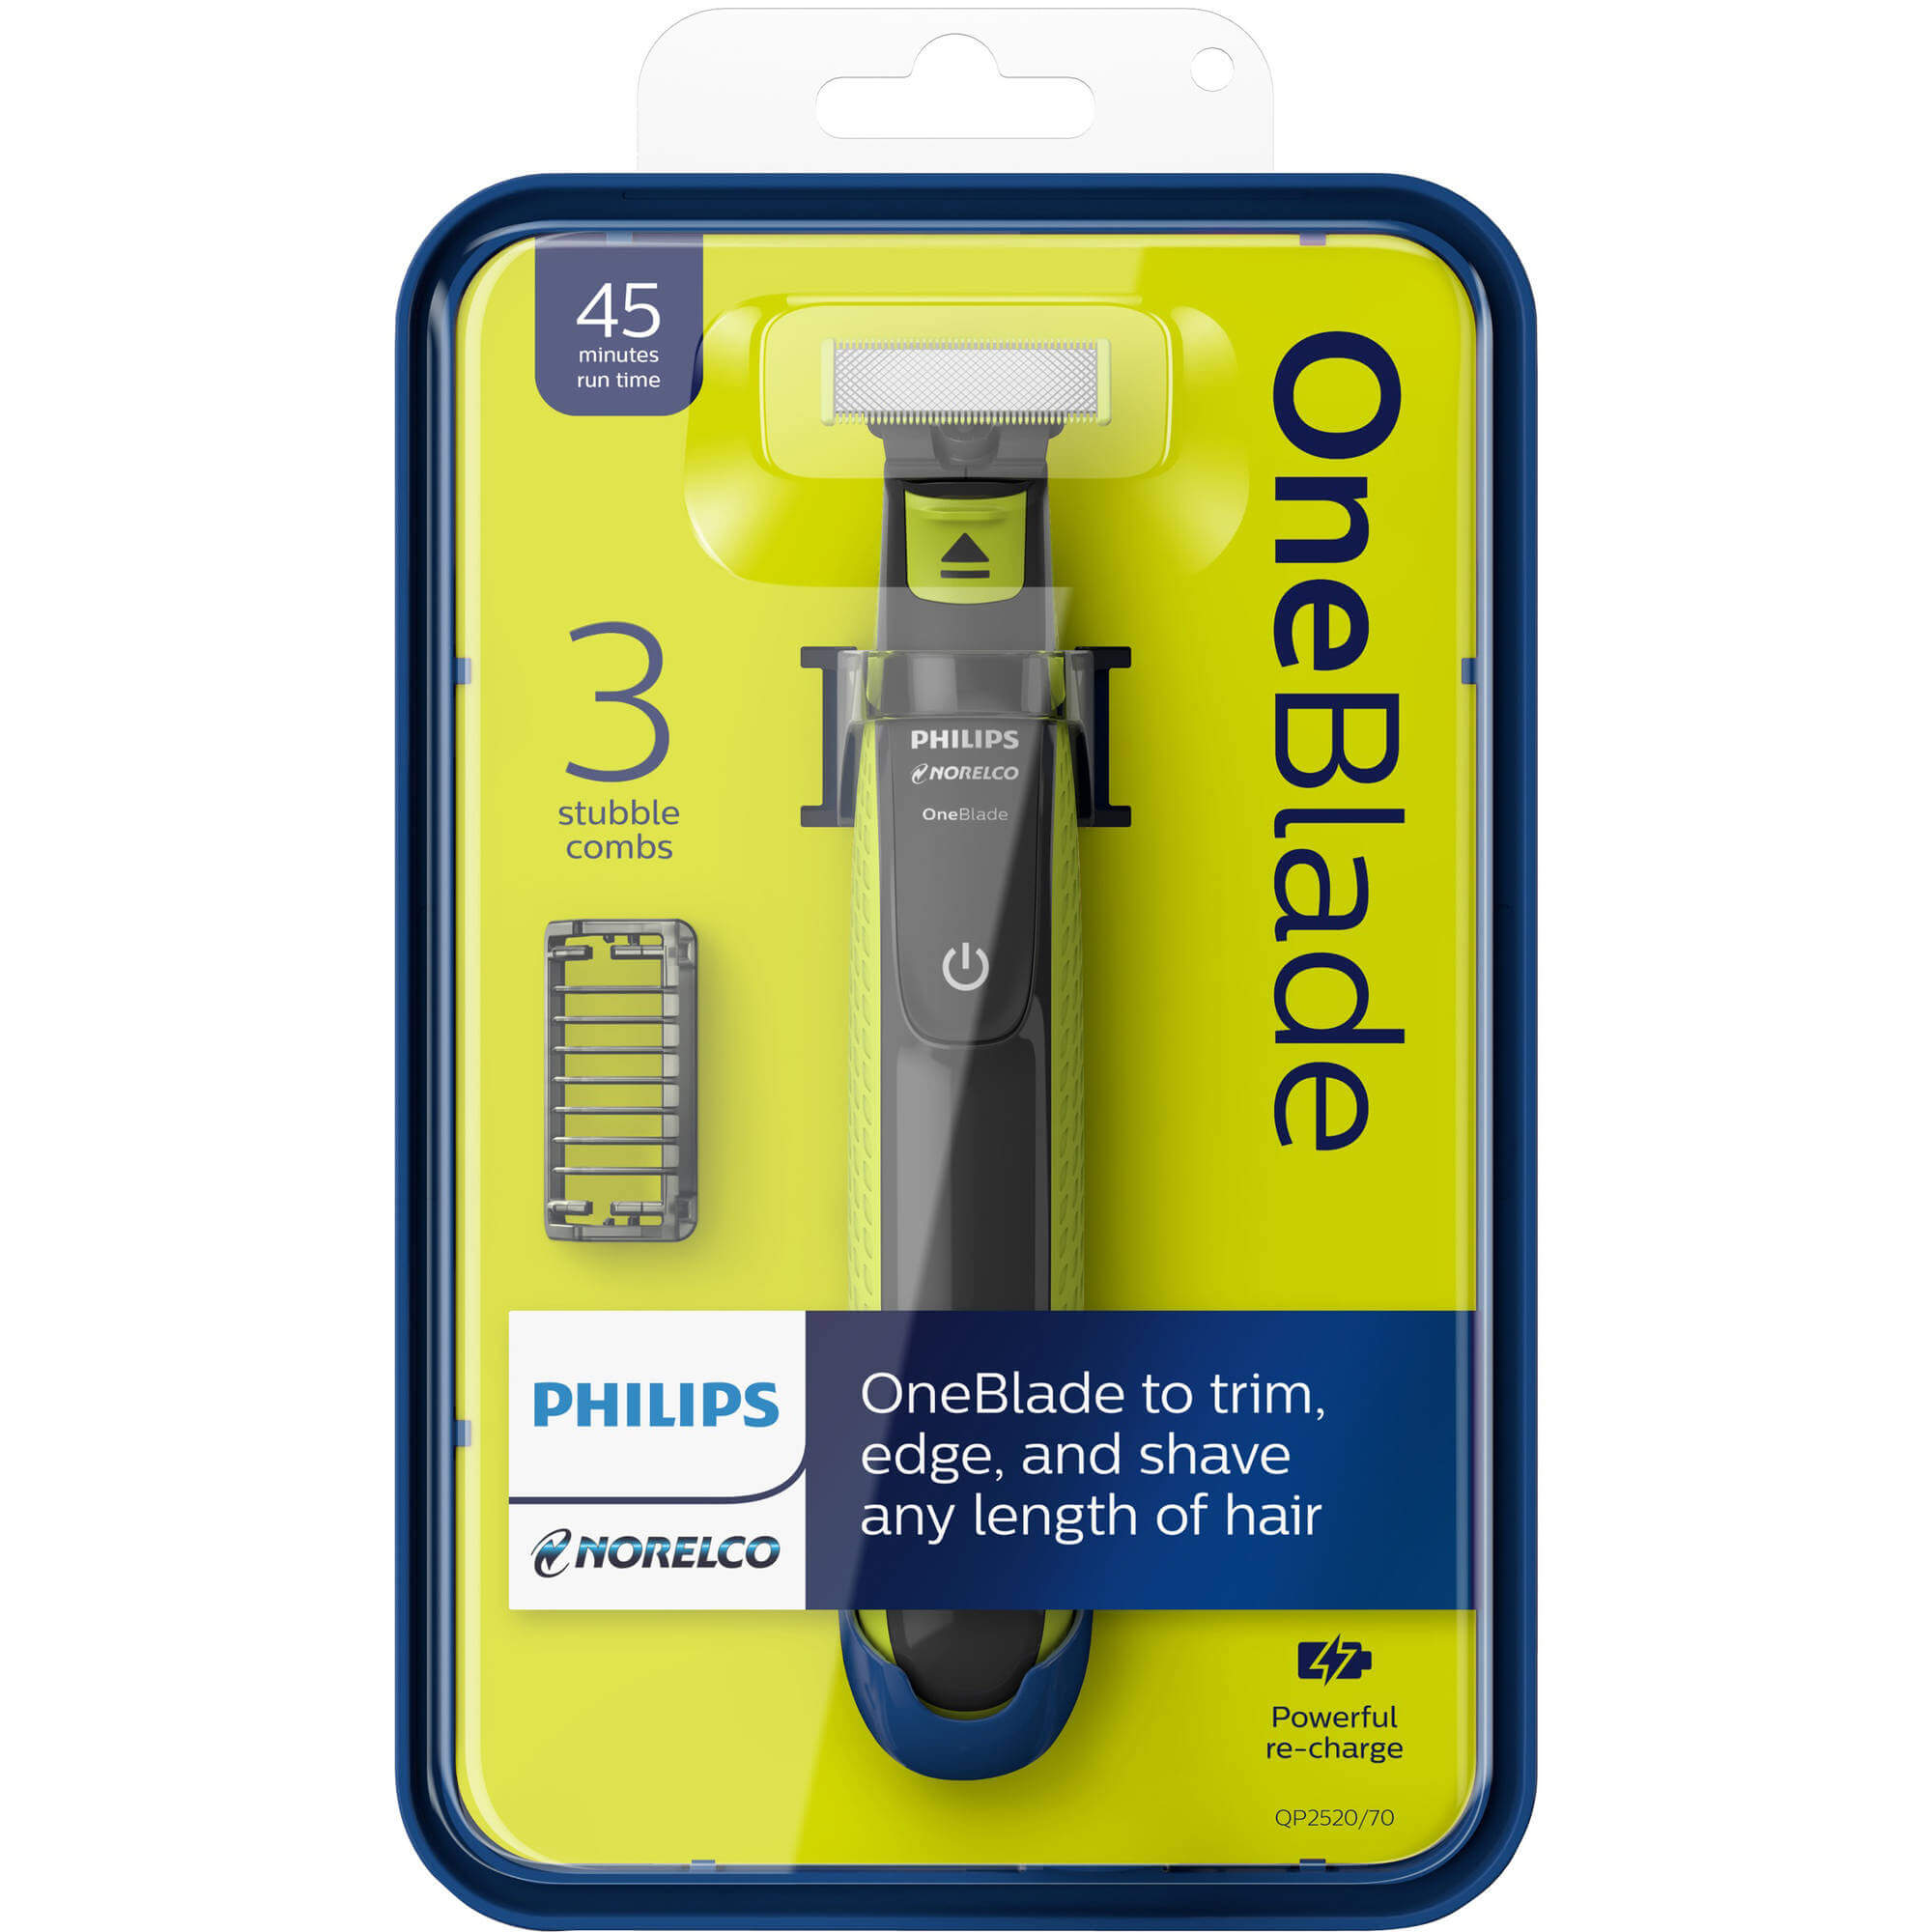 Philips Norelco One Blade VS Safety Razor - Which Shaves Best? 